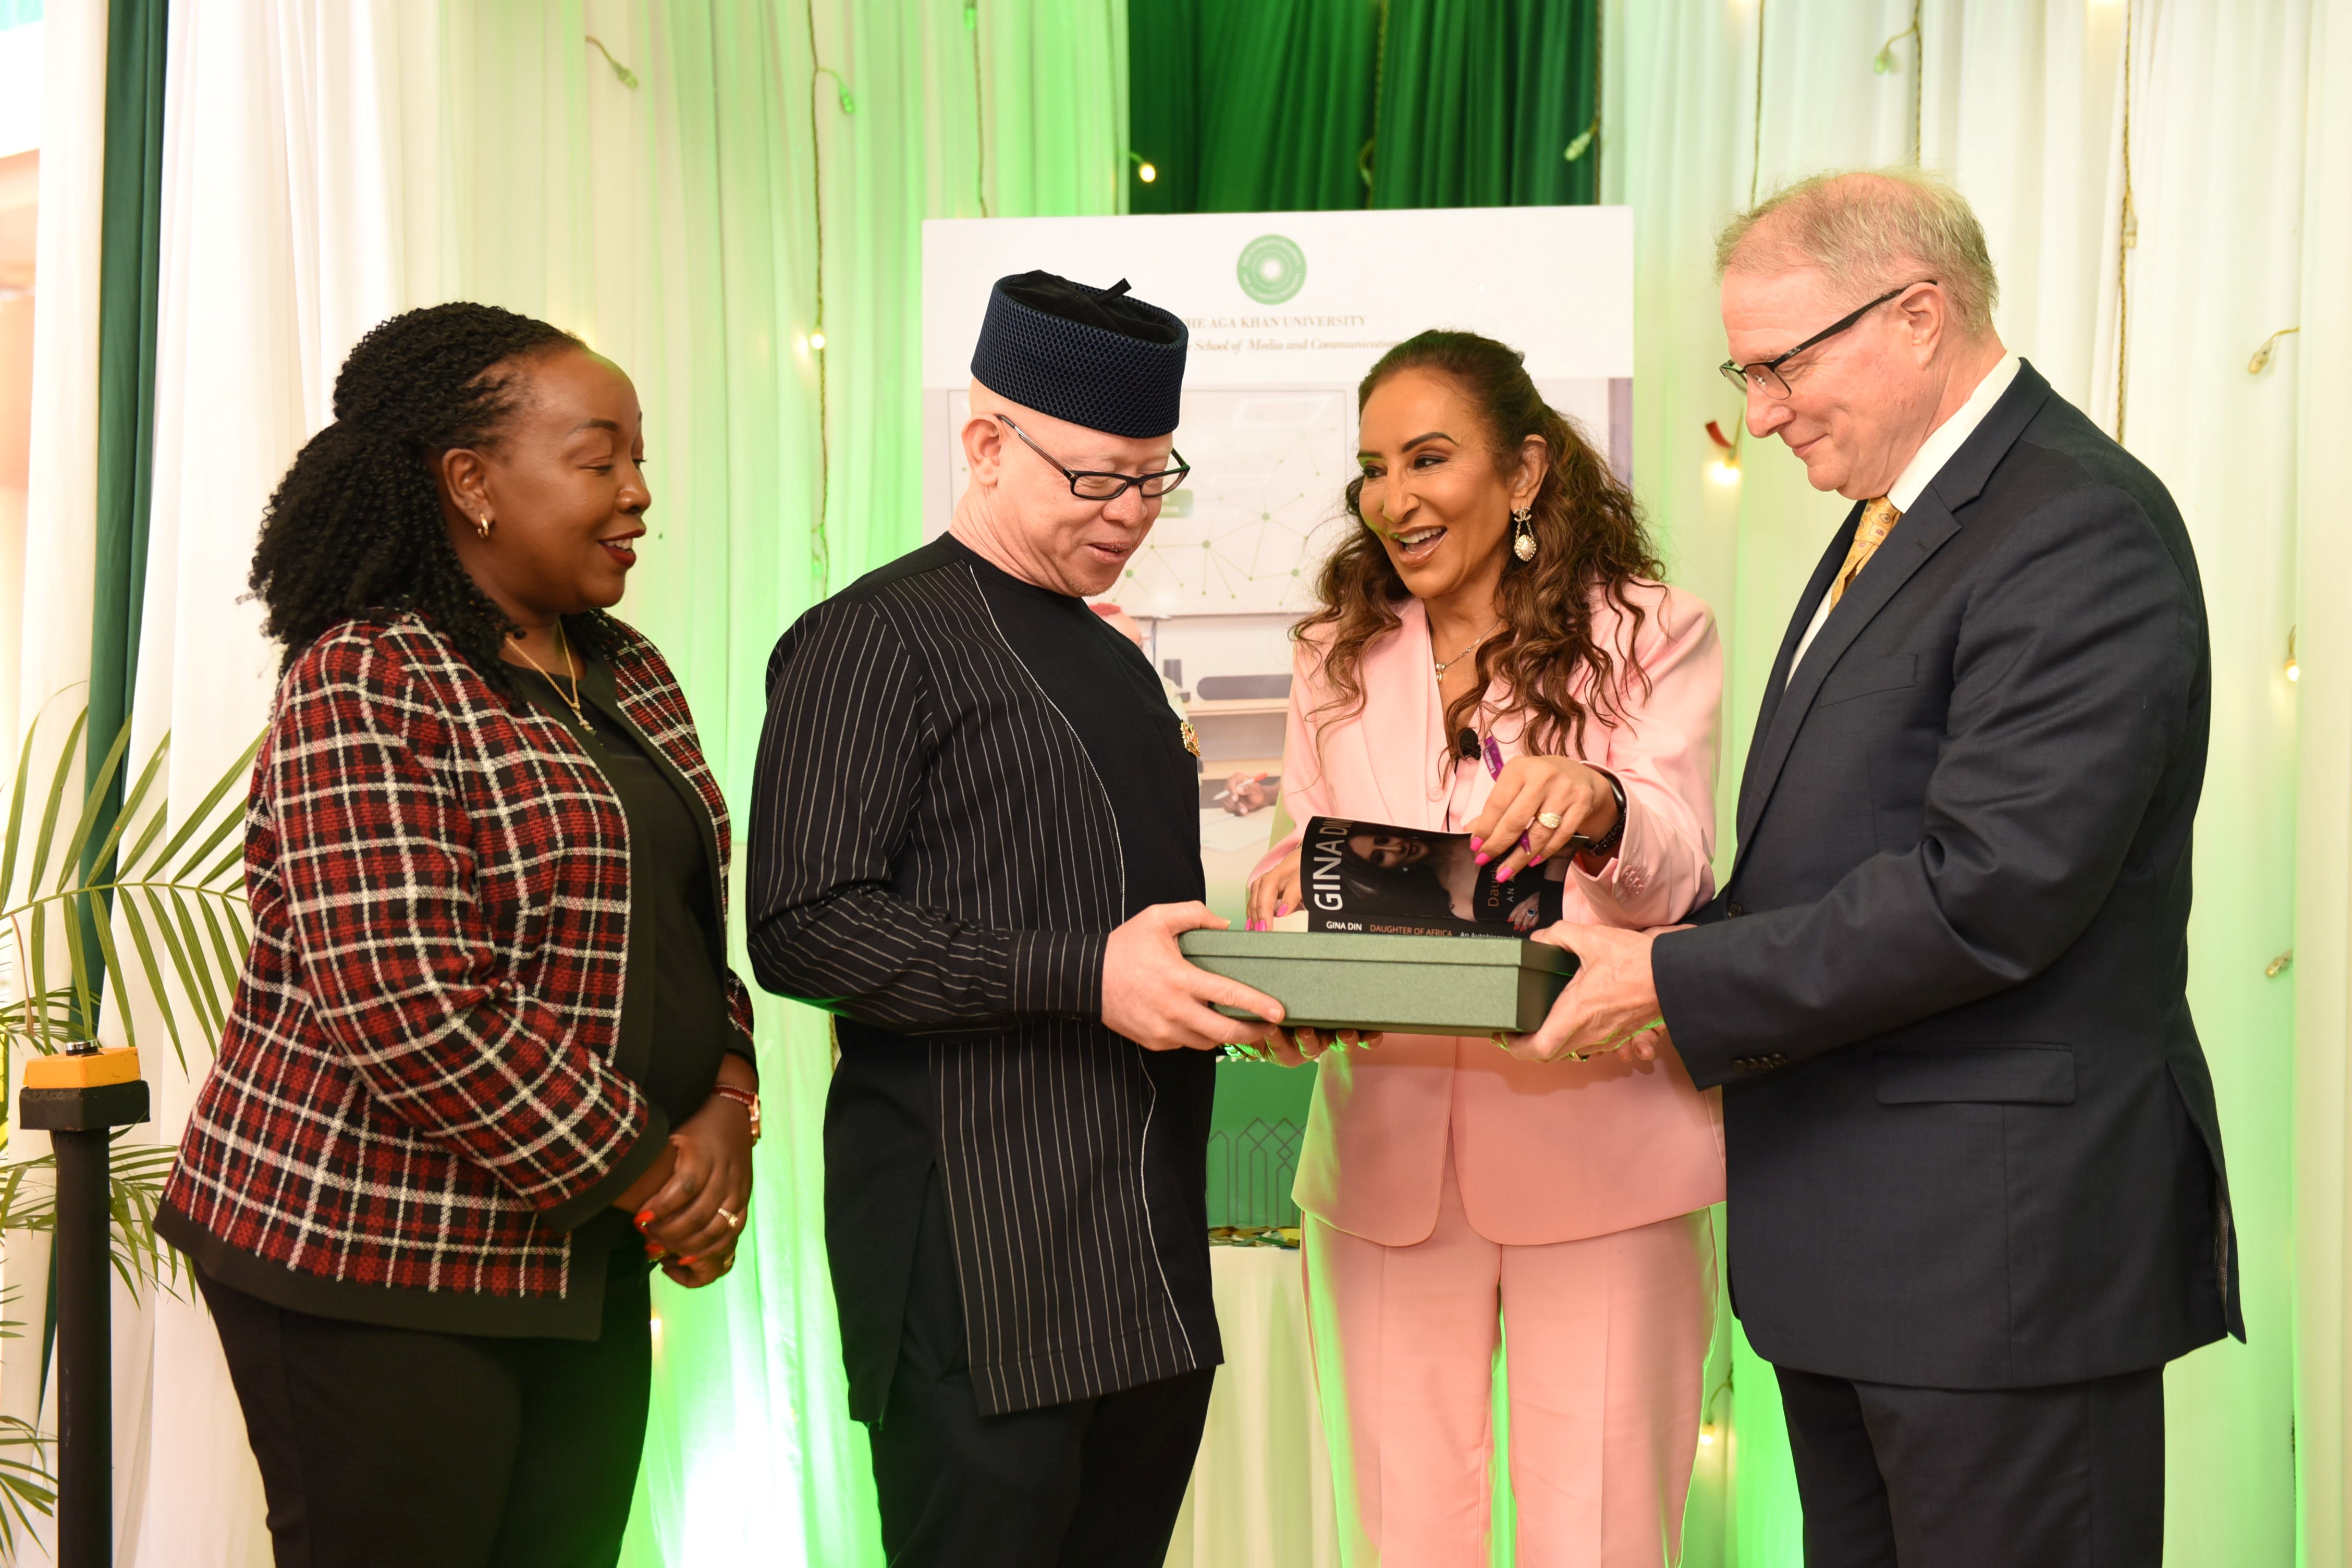 Aga Khan University (AKU) GSMC Dean Prof. Nancy Booker, Government Spokesperson Isaac Mwaura, Gina Din Group Founder and Executive Chair Gina Din, and AKU Provost and Vice President Academics Dr. Carl Amrhein pose for a photo.